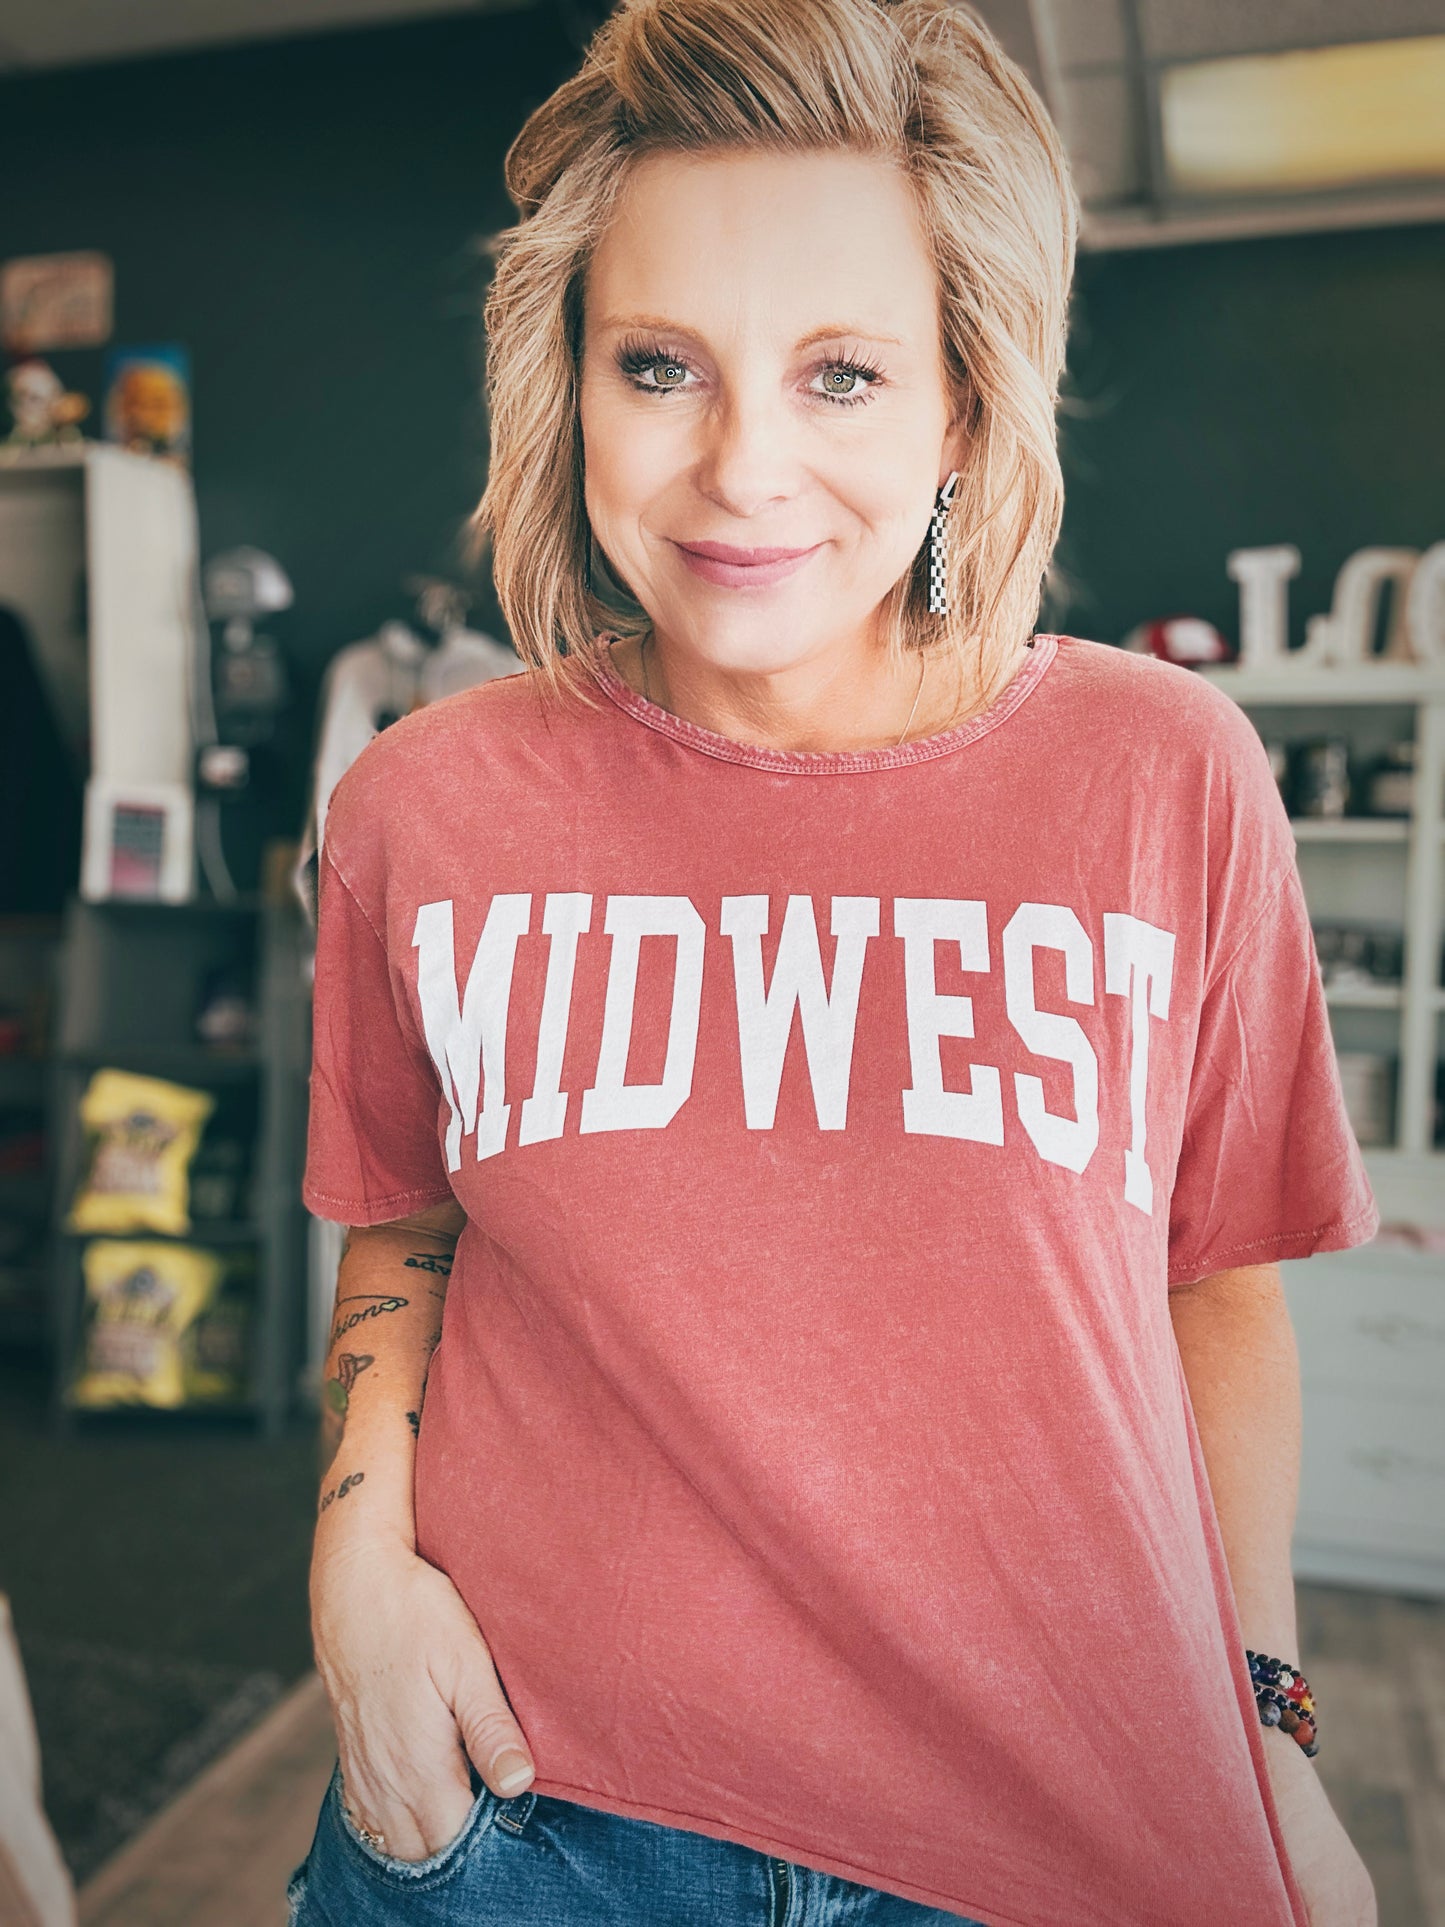 MIDWEST Mineral Washed Graphic Top